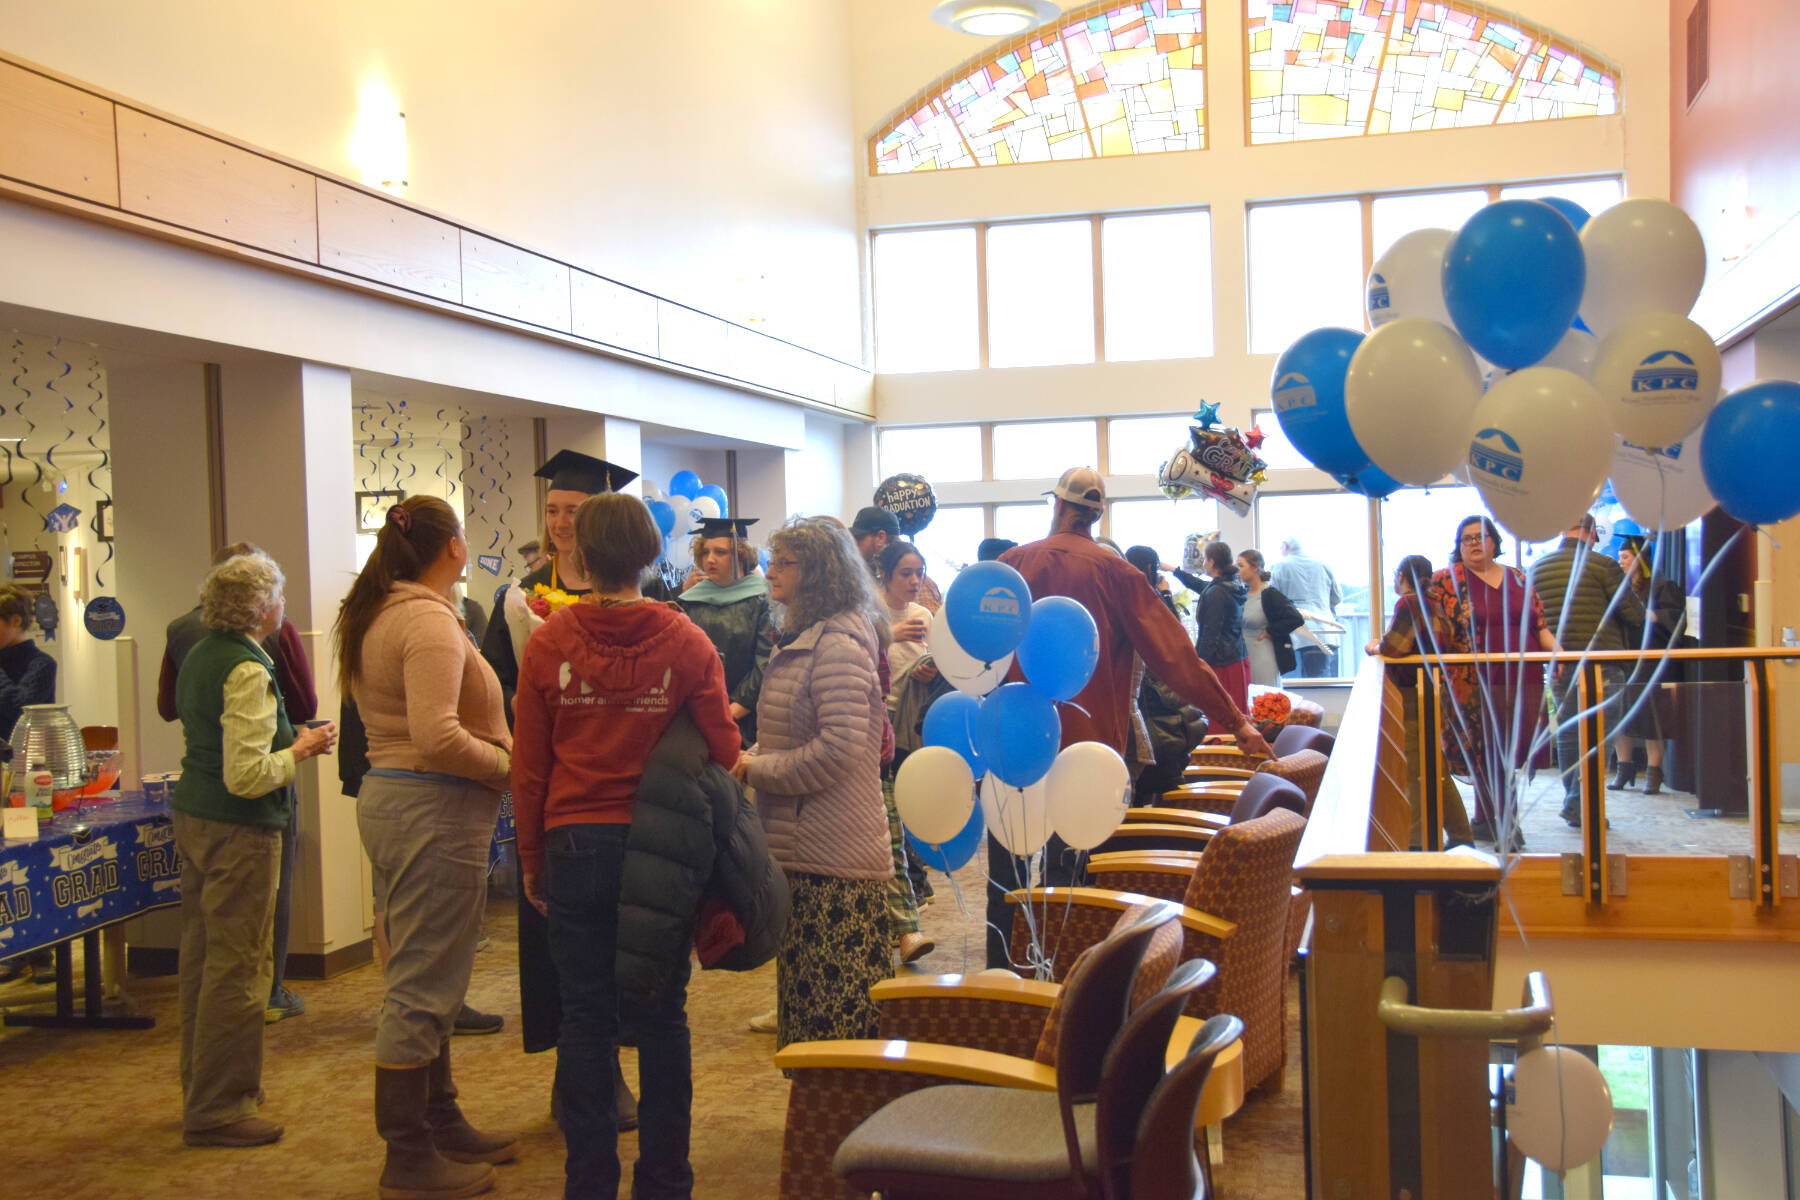 Kachemak Bay Campus graduates and their family members enjoy a reception gathering after the 2023 KBC Commencement on Wednesday, May 10, 2023, in Homer, Alaska. (Photo by Delcenia Cosman/Homer News)